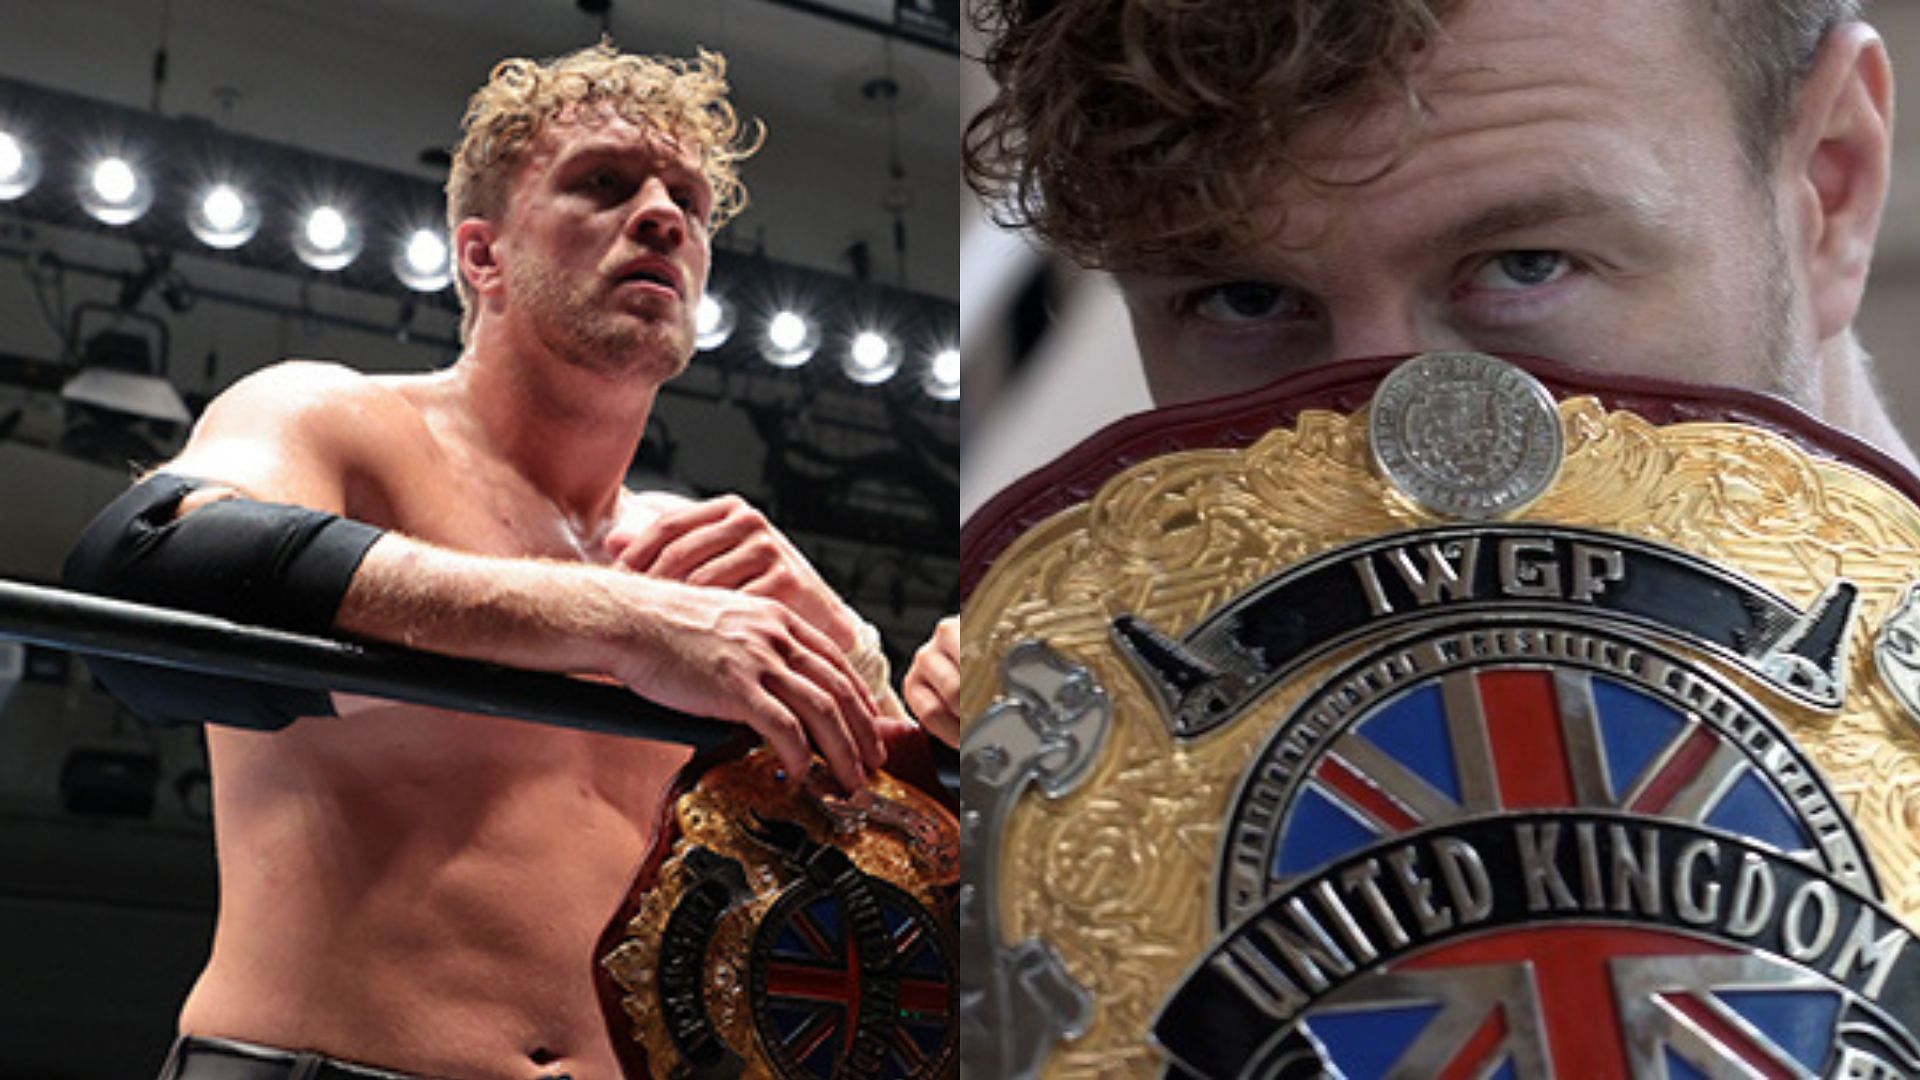 Will Ospreay is a former IWGP US/UK Champion